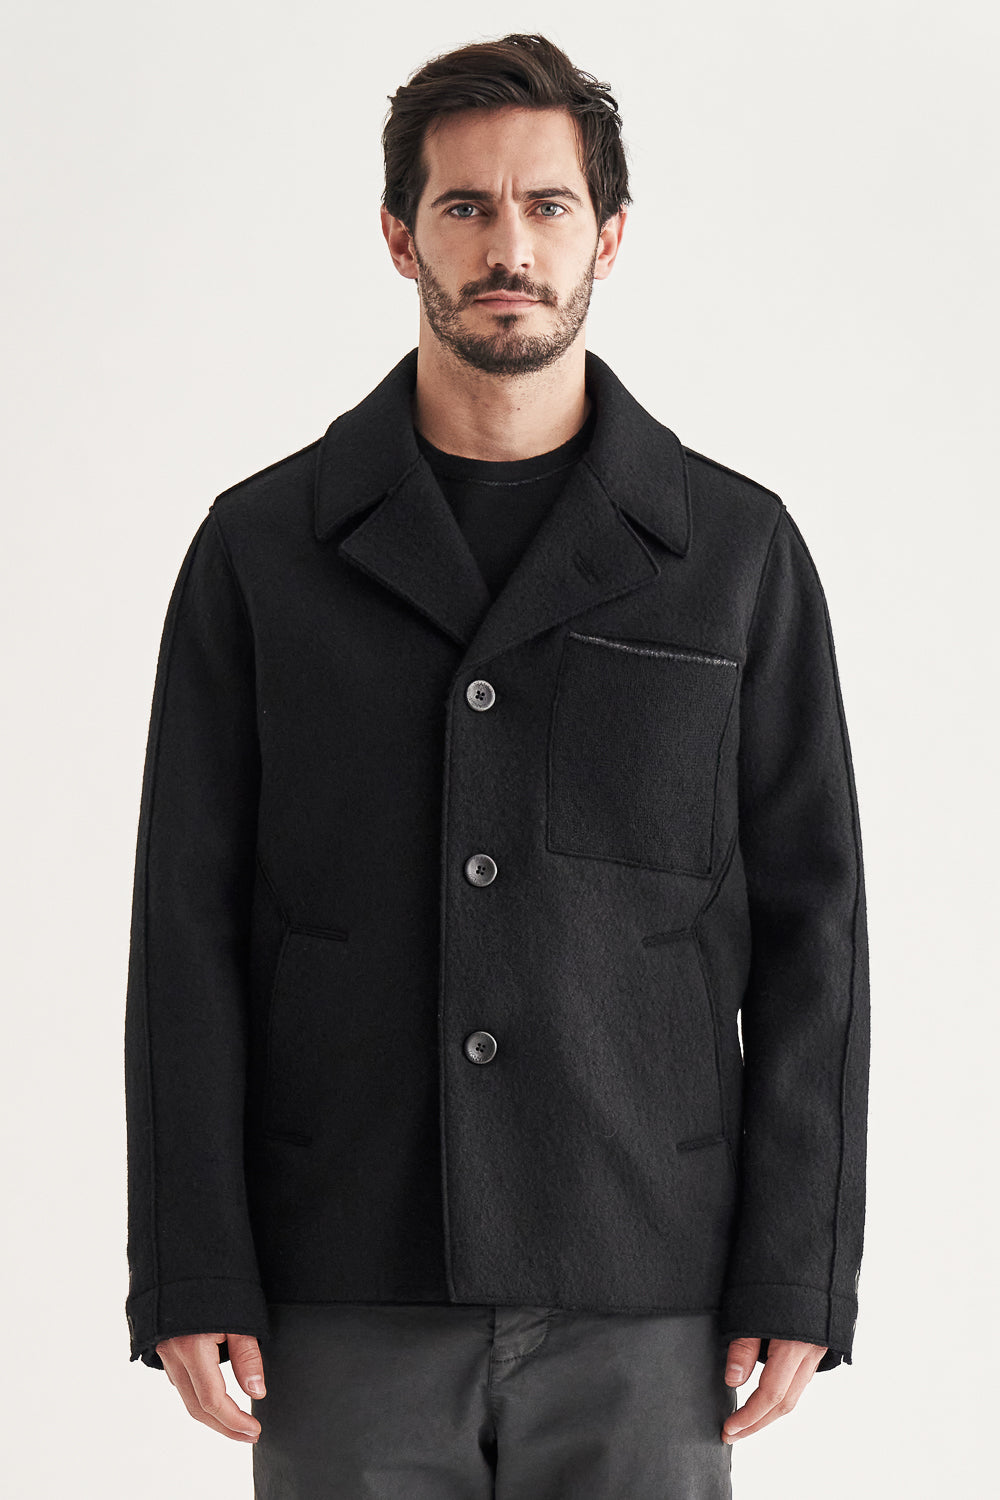 Buy the Transit Raw Cut Boiled Wool Peacoat in Black at Intro. Spend £50 for free UK delivery. Official stockists. We ship worldwide.